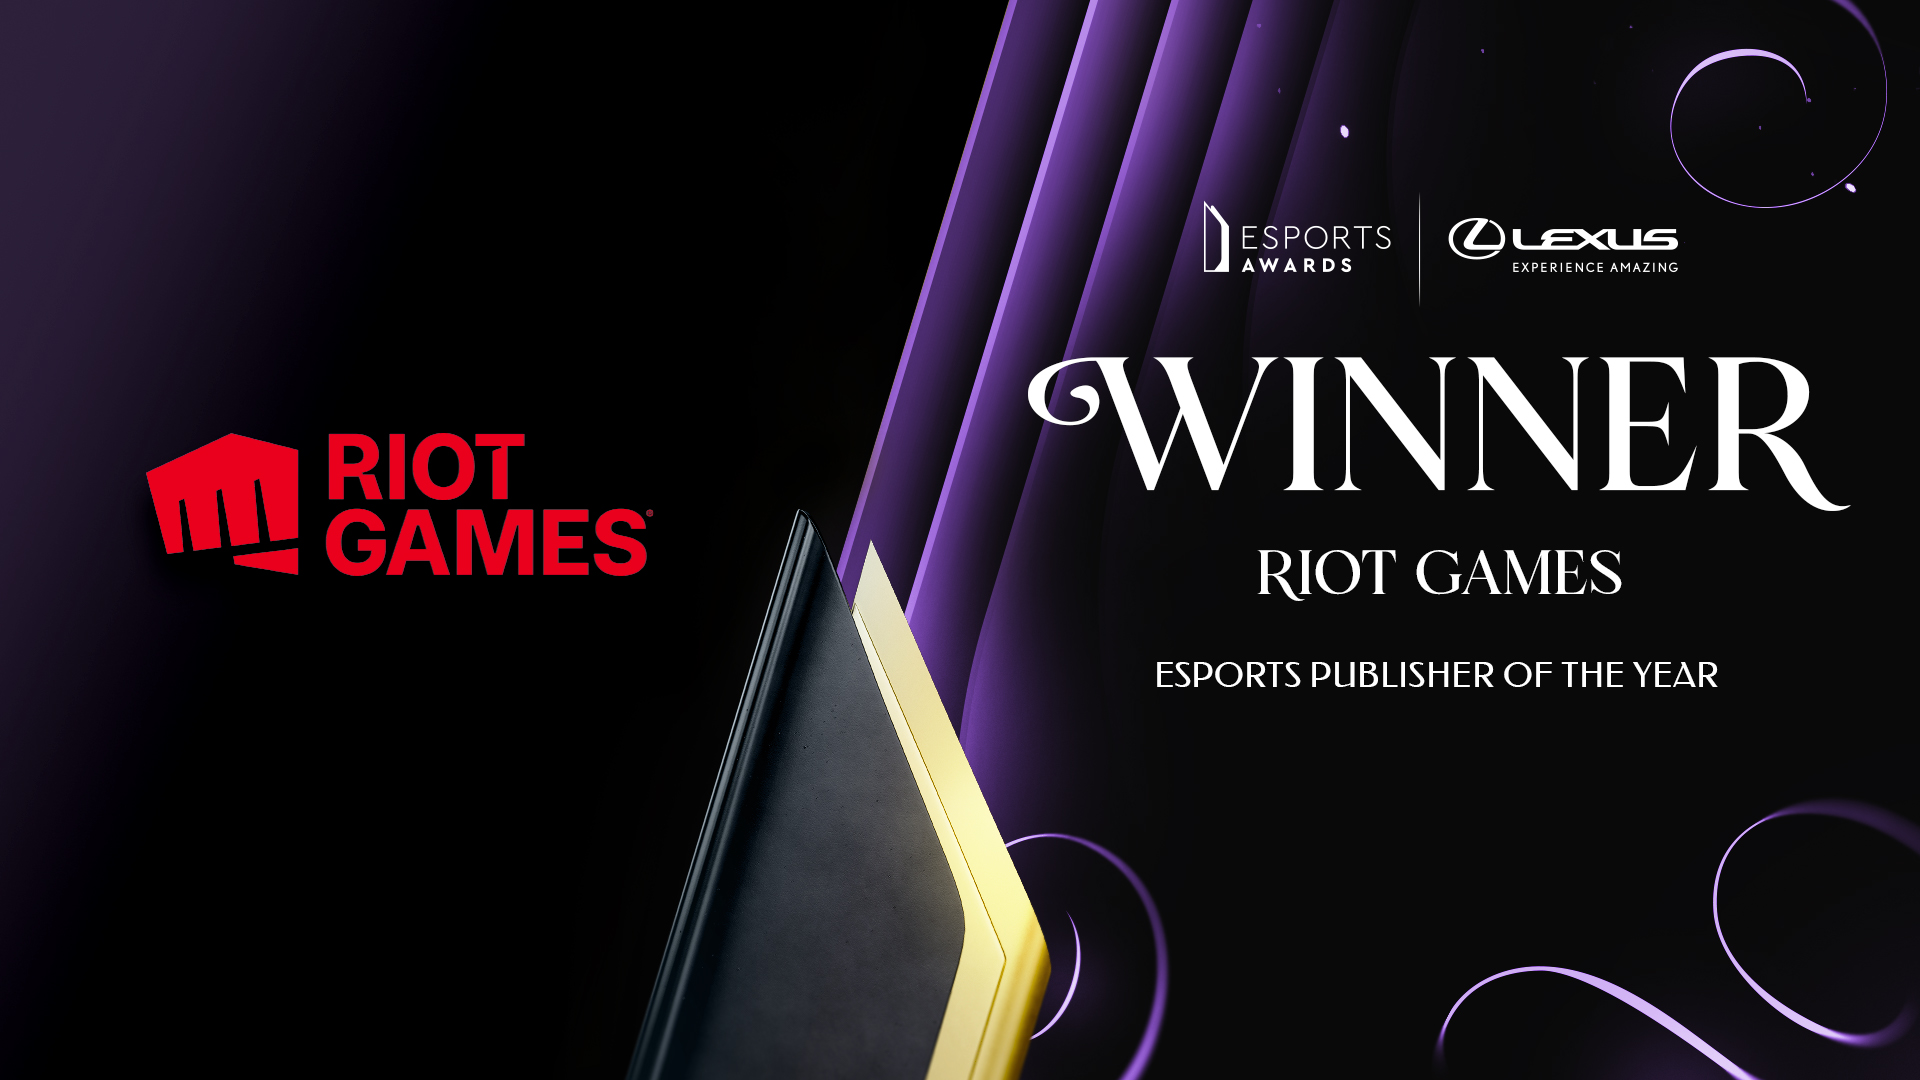 Esports Publisher of the Year: Riot Games